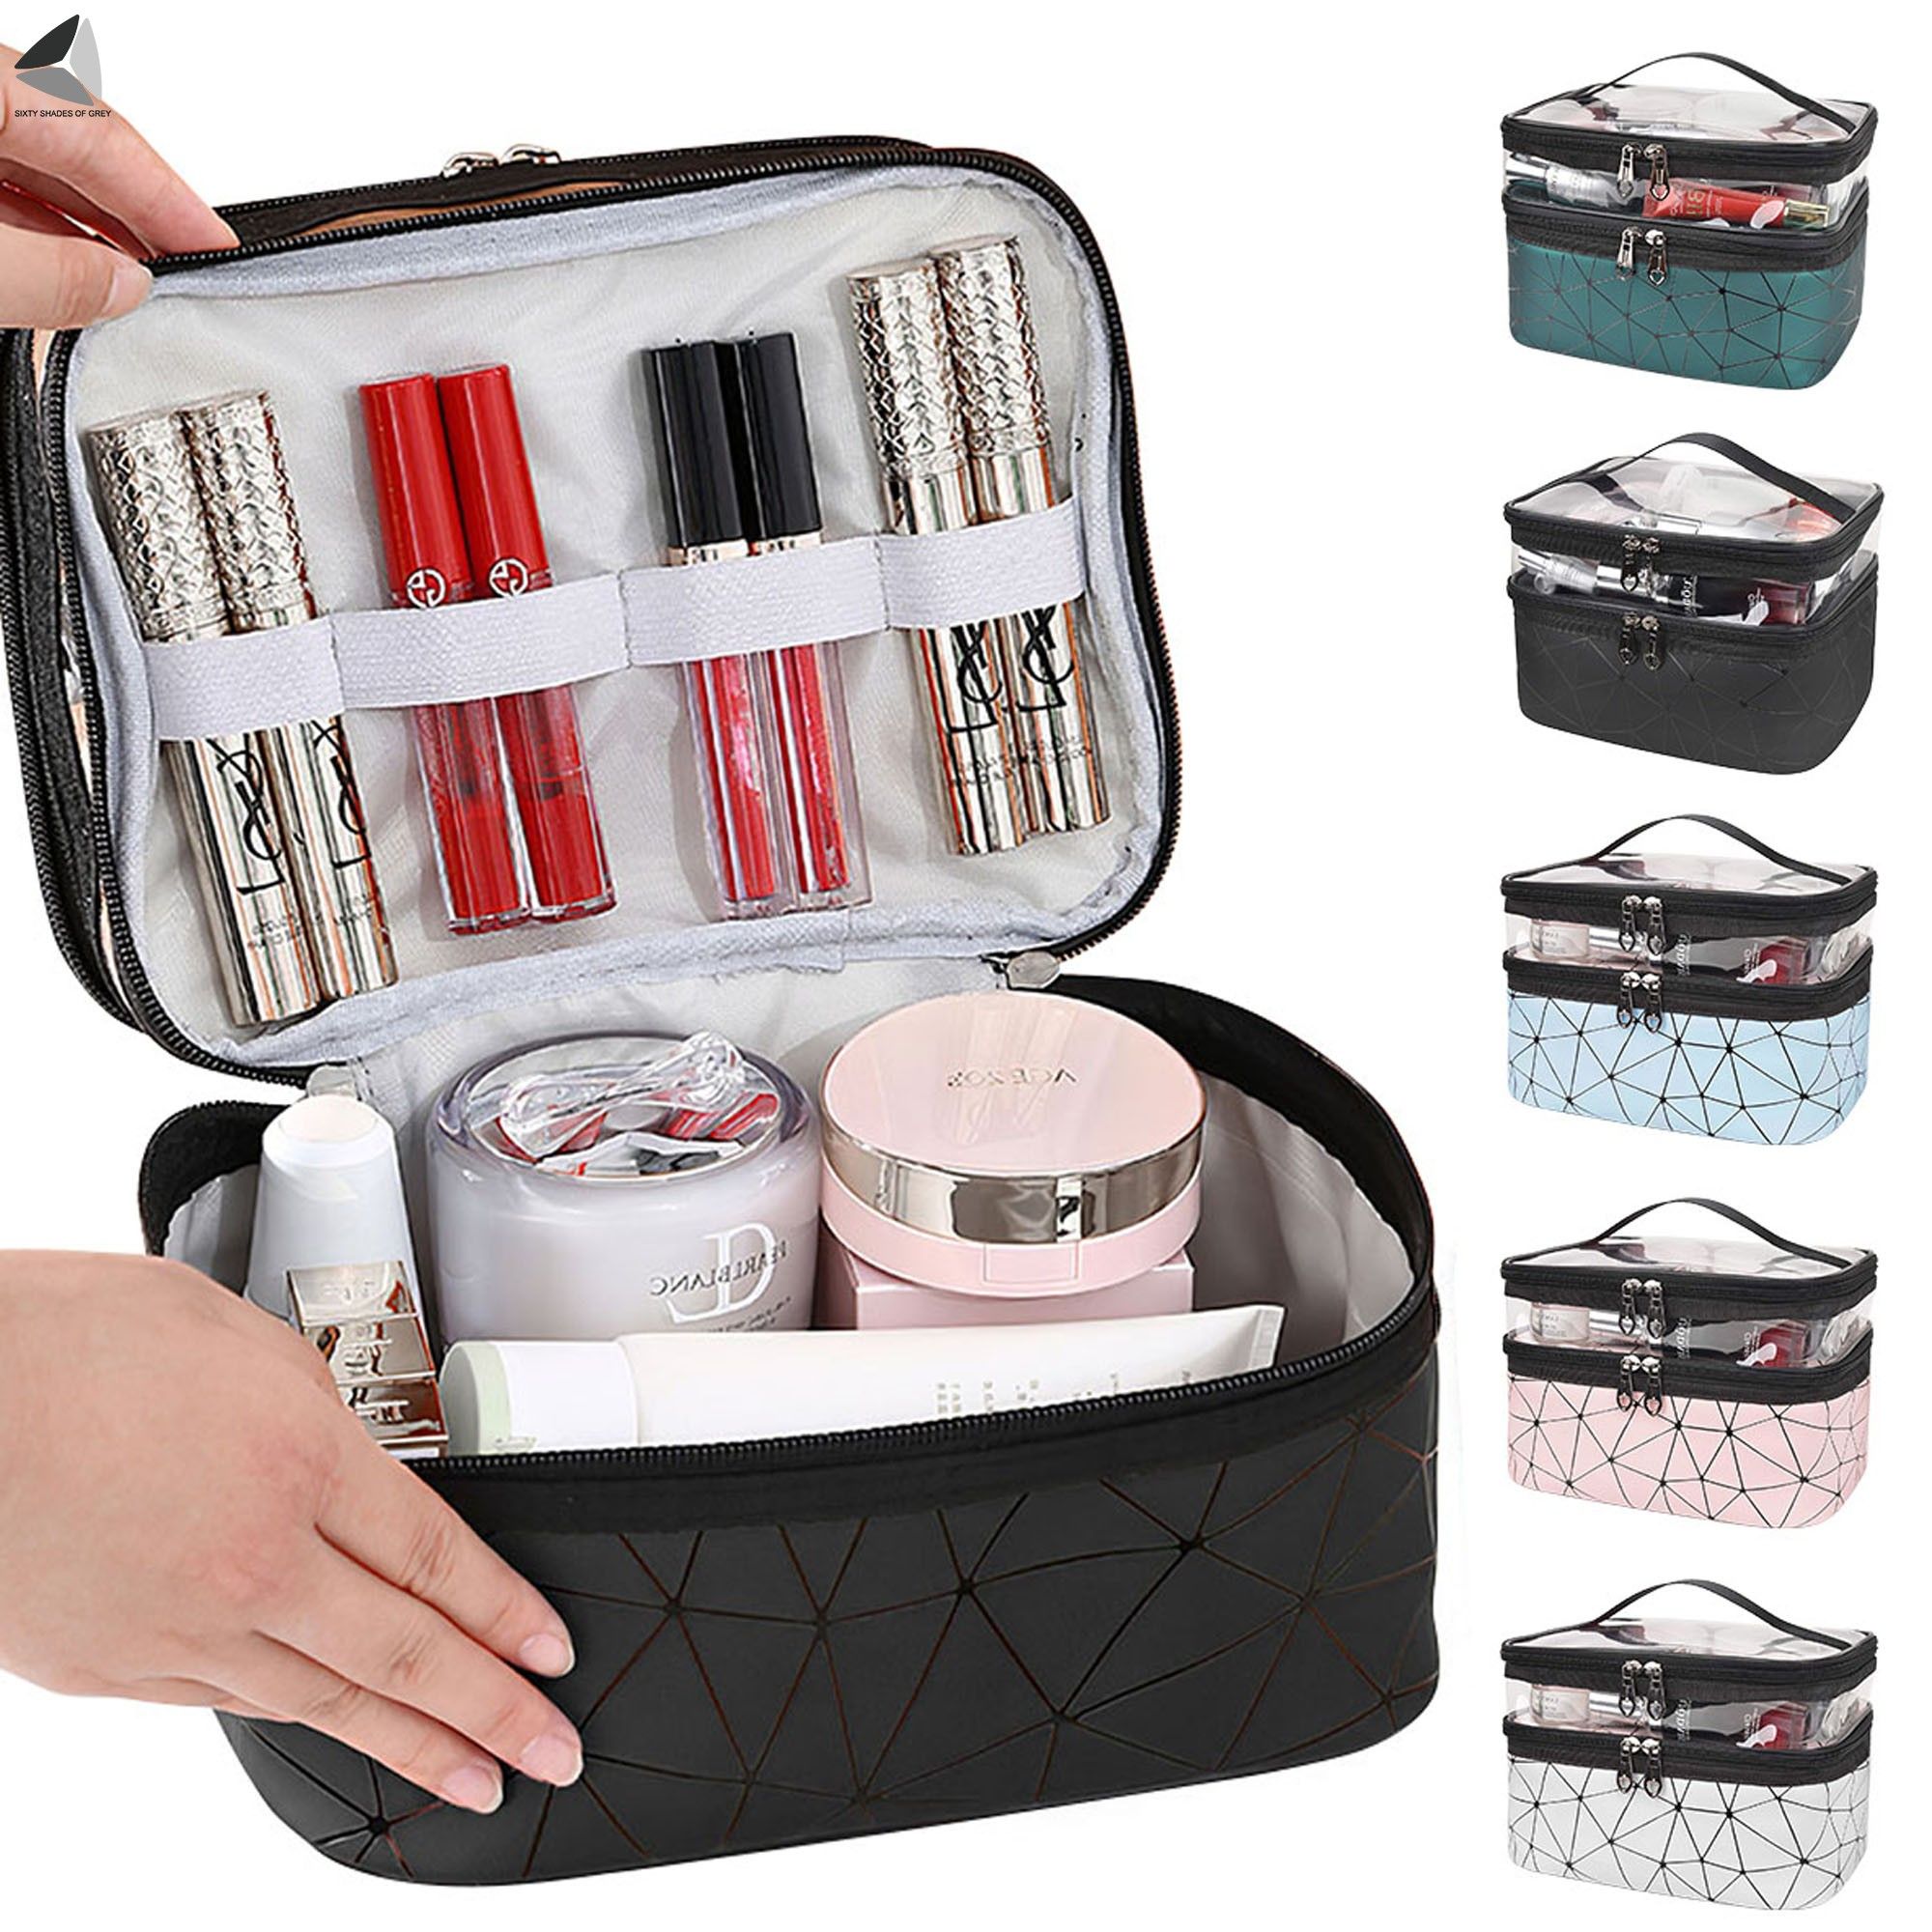 PULLIMORE Portable Travel Makeup Bags Double Layer Cosmetic Cases Make Up Organizer Toiletry Bag for Women and Girls (Pink) - image 1 of 8